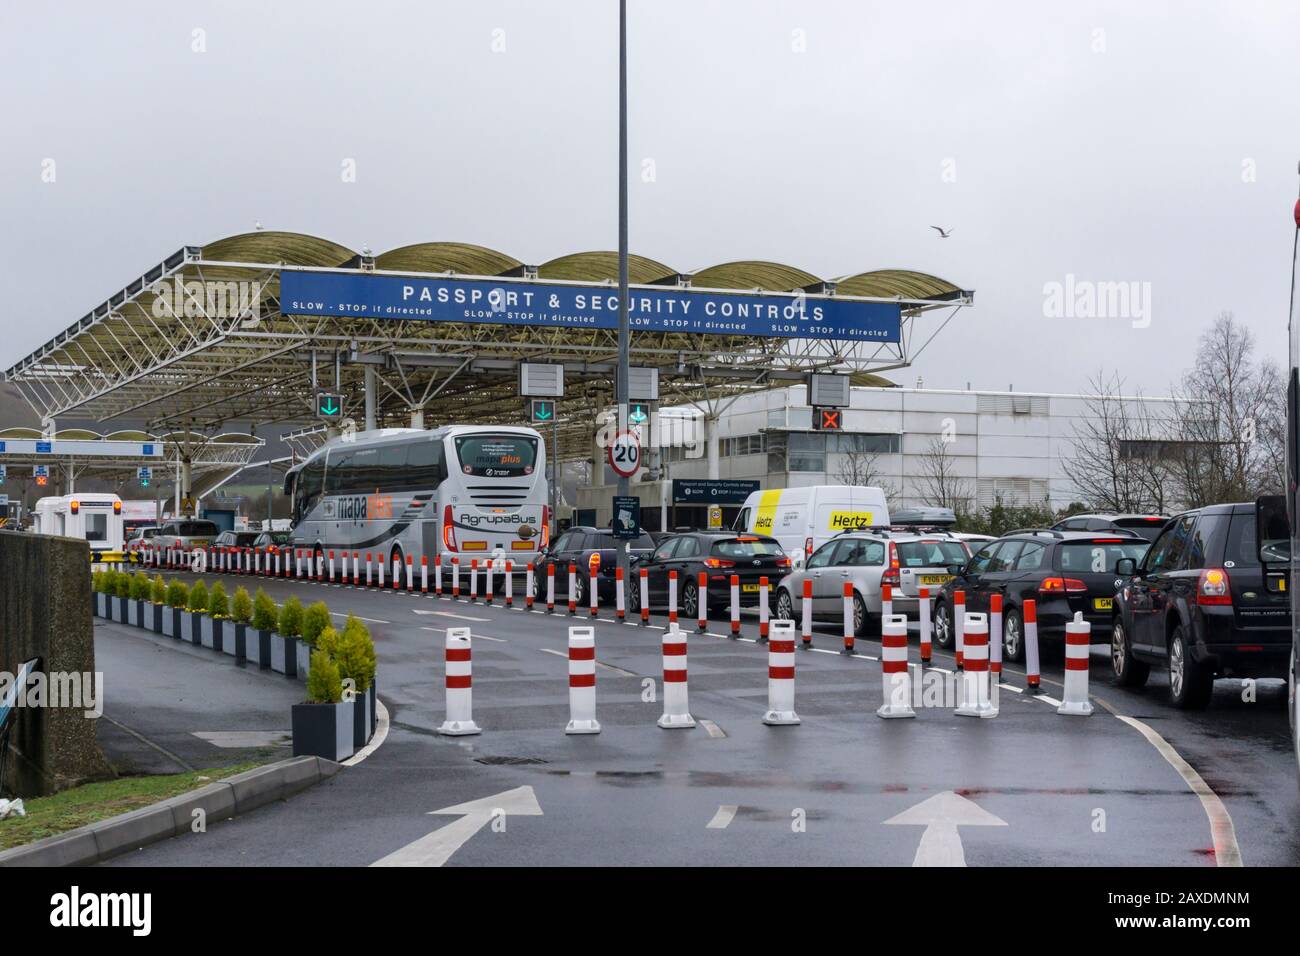 Cars queue for Passport & Security Controls on the English side of the Channel Tunnel at Folkestone. Stock Photo